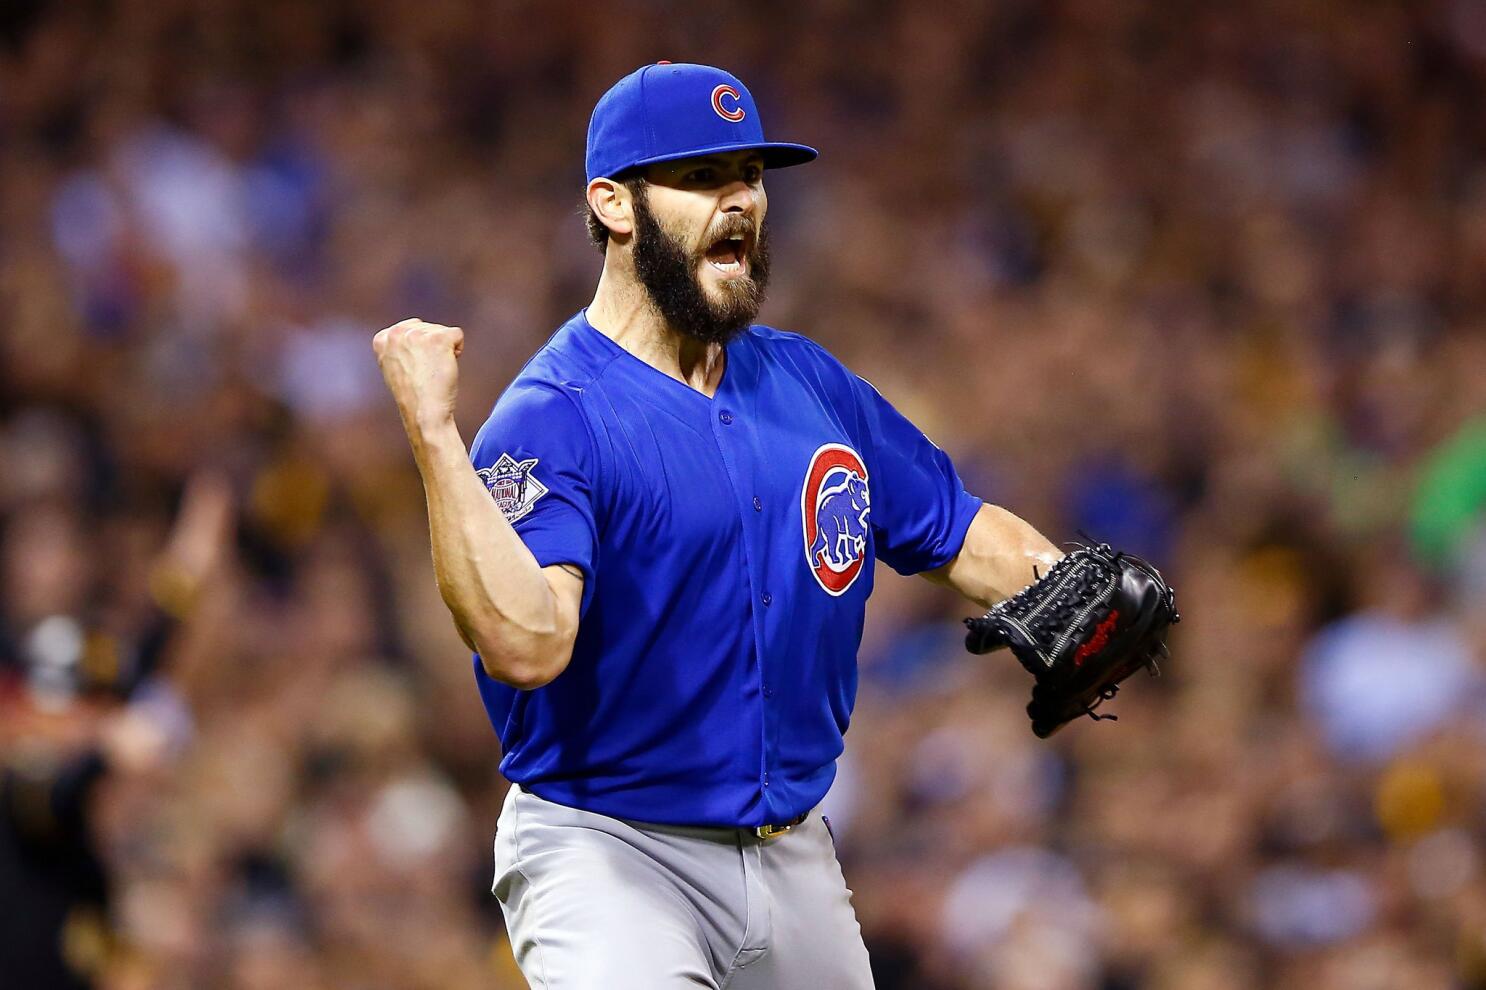 Chicago Cubs through to NLDS as Jake Arrieta masters Pittsburgh